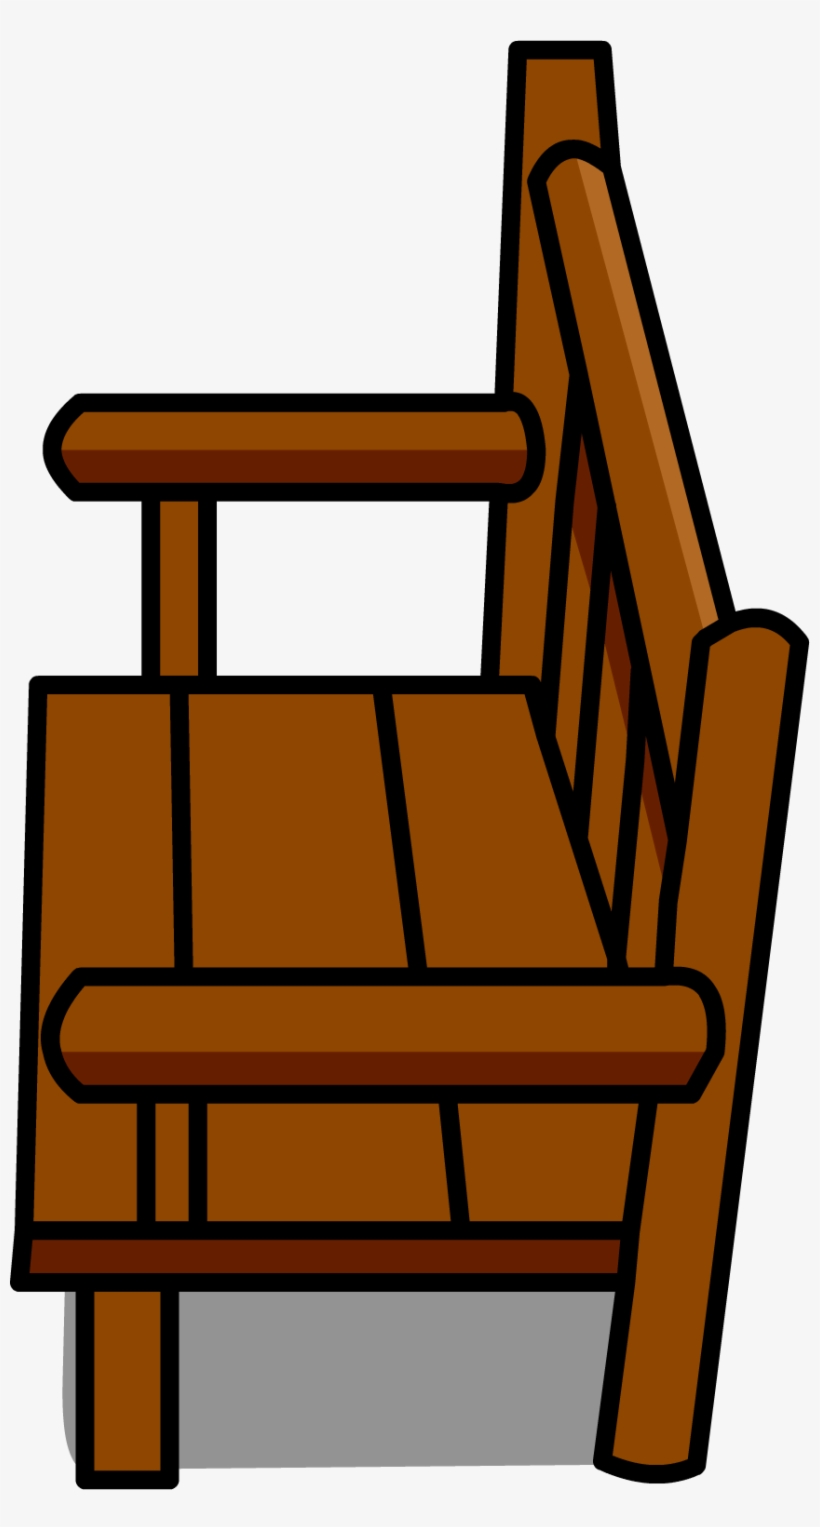 Image Wood Bench Sprite Png Wiki Fandom - Chair, transparent png #9264854